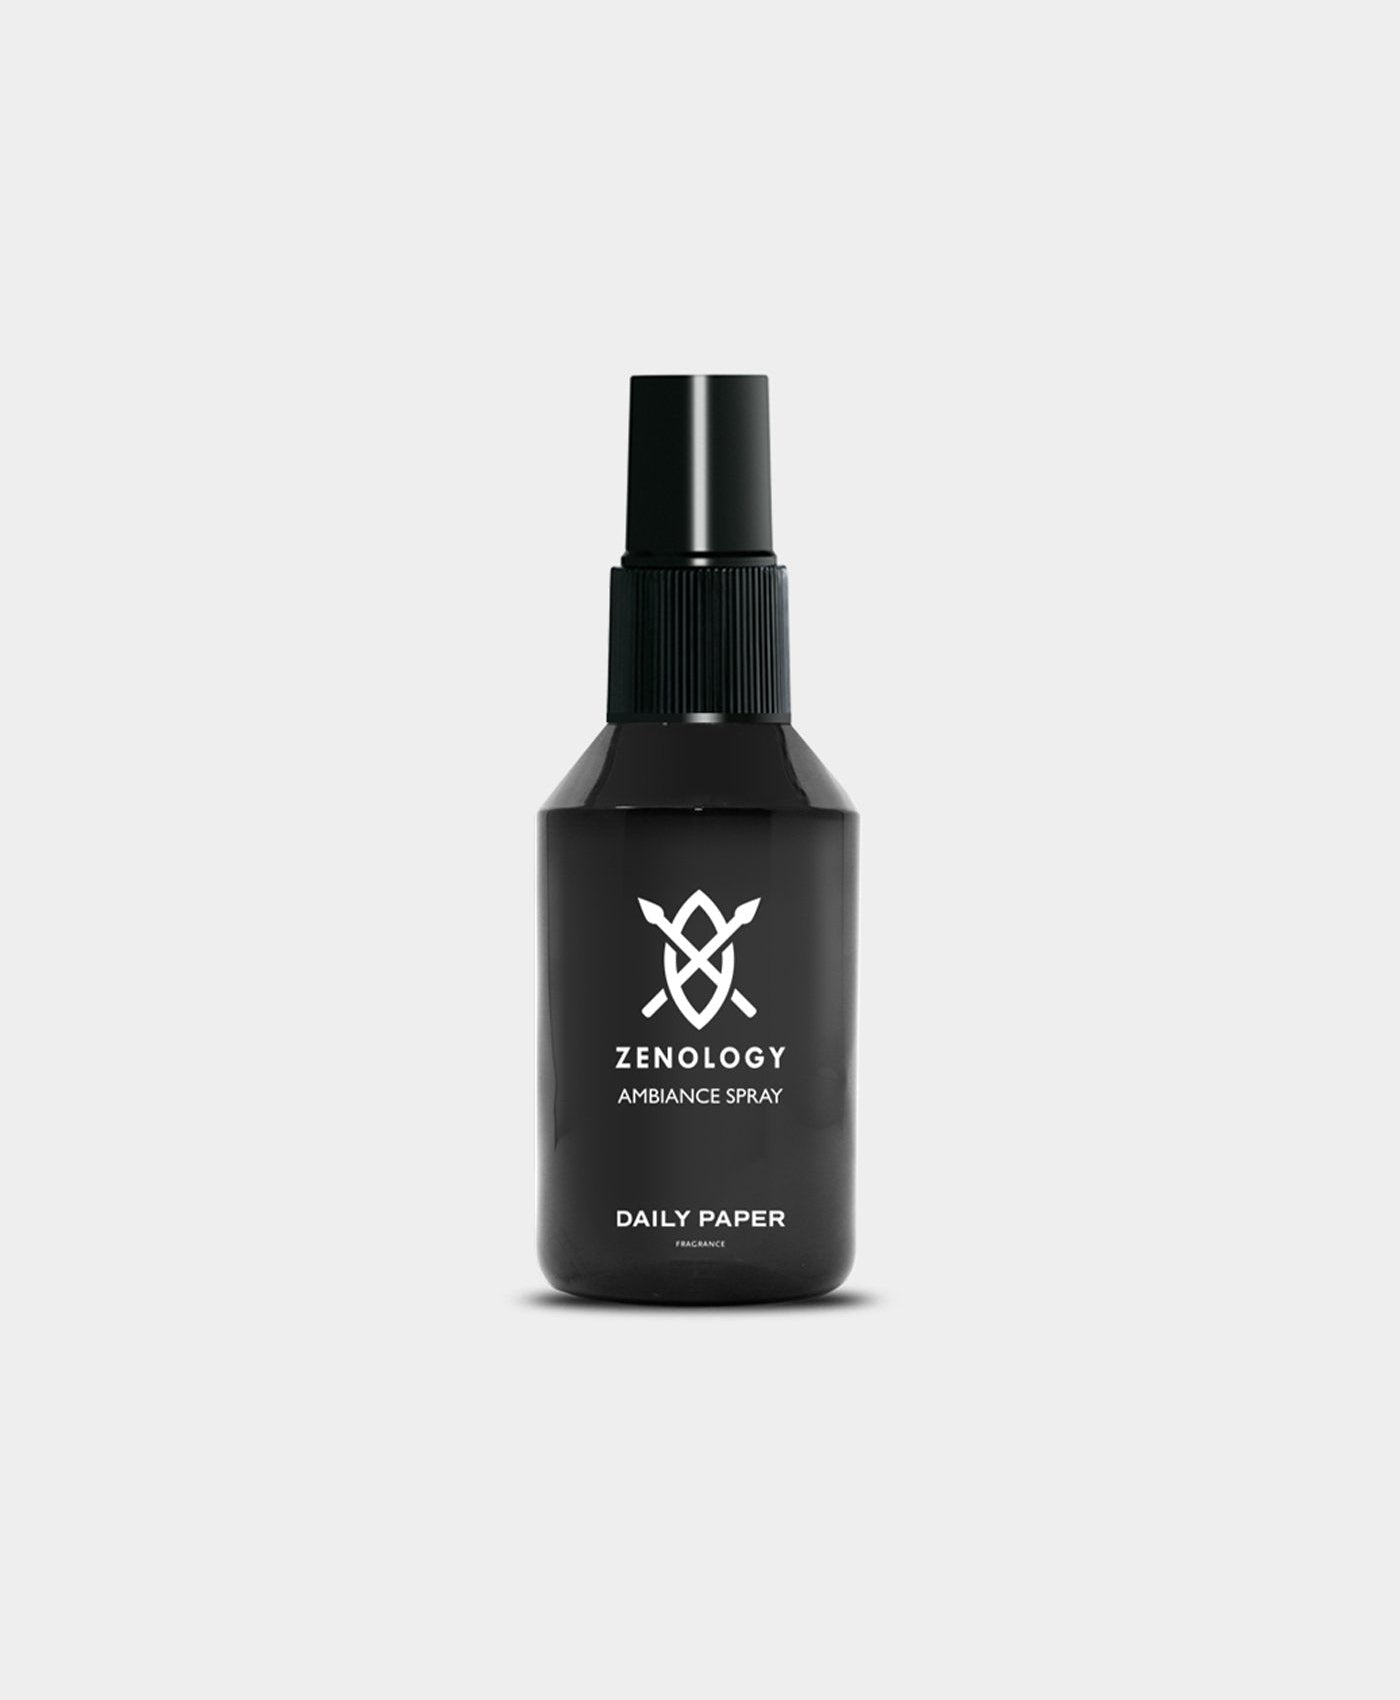 DP - Daily Paper x Zenology Modern Nomad Ambiance Spray - Packshot - Front